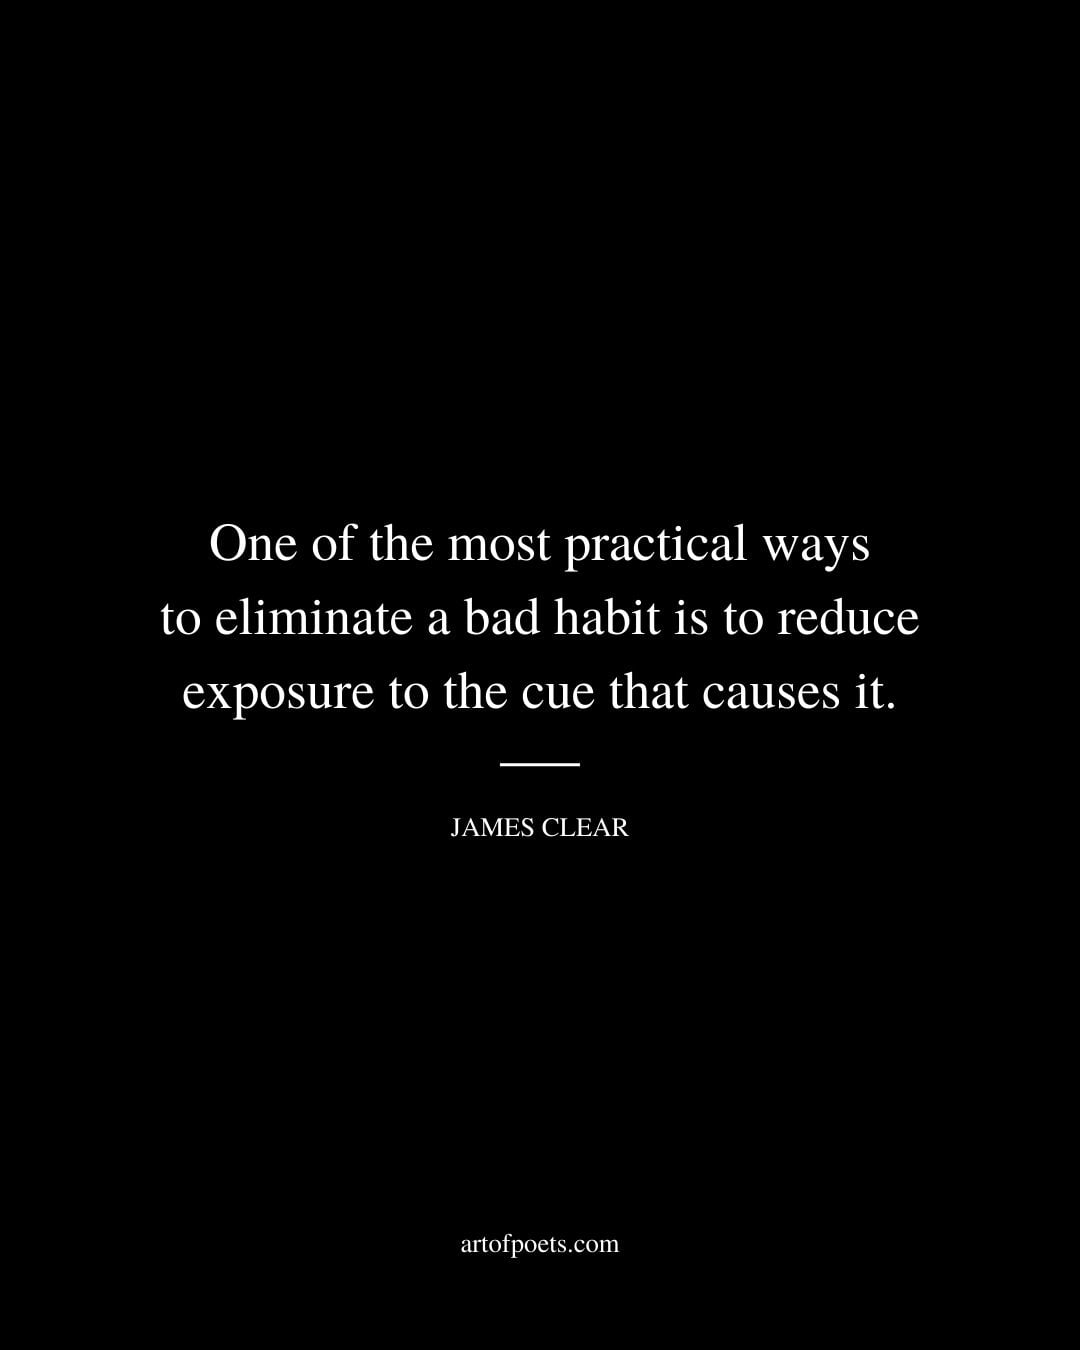 One of the most practical ways to eliminate a bad habit is to reduce exposure to the cue that causes it